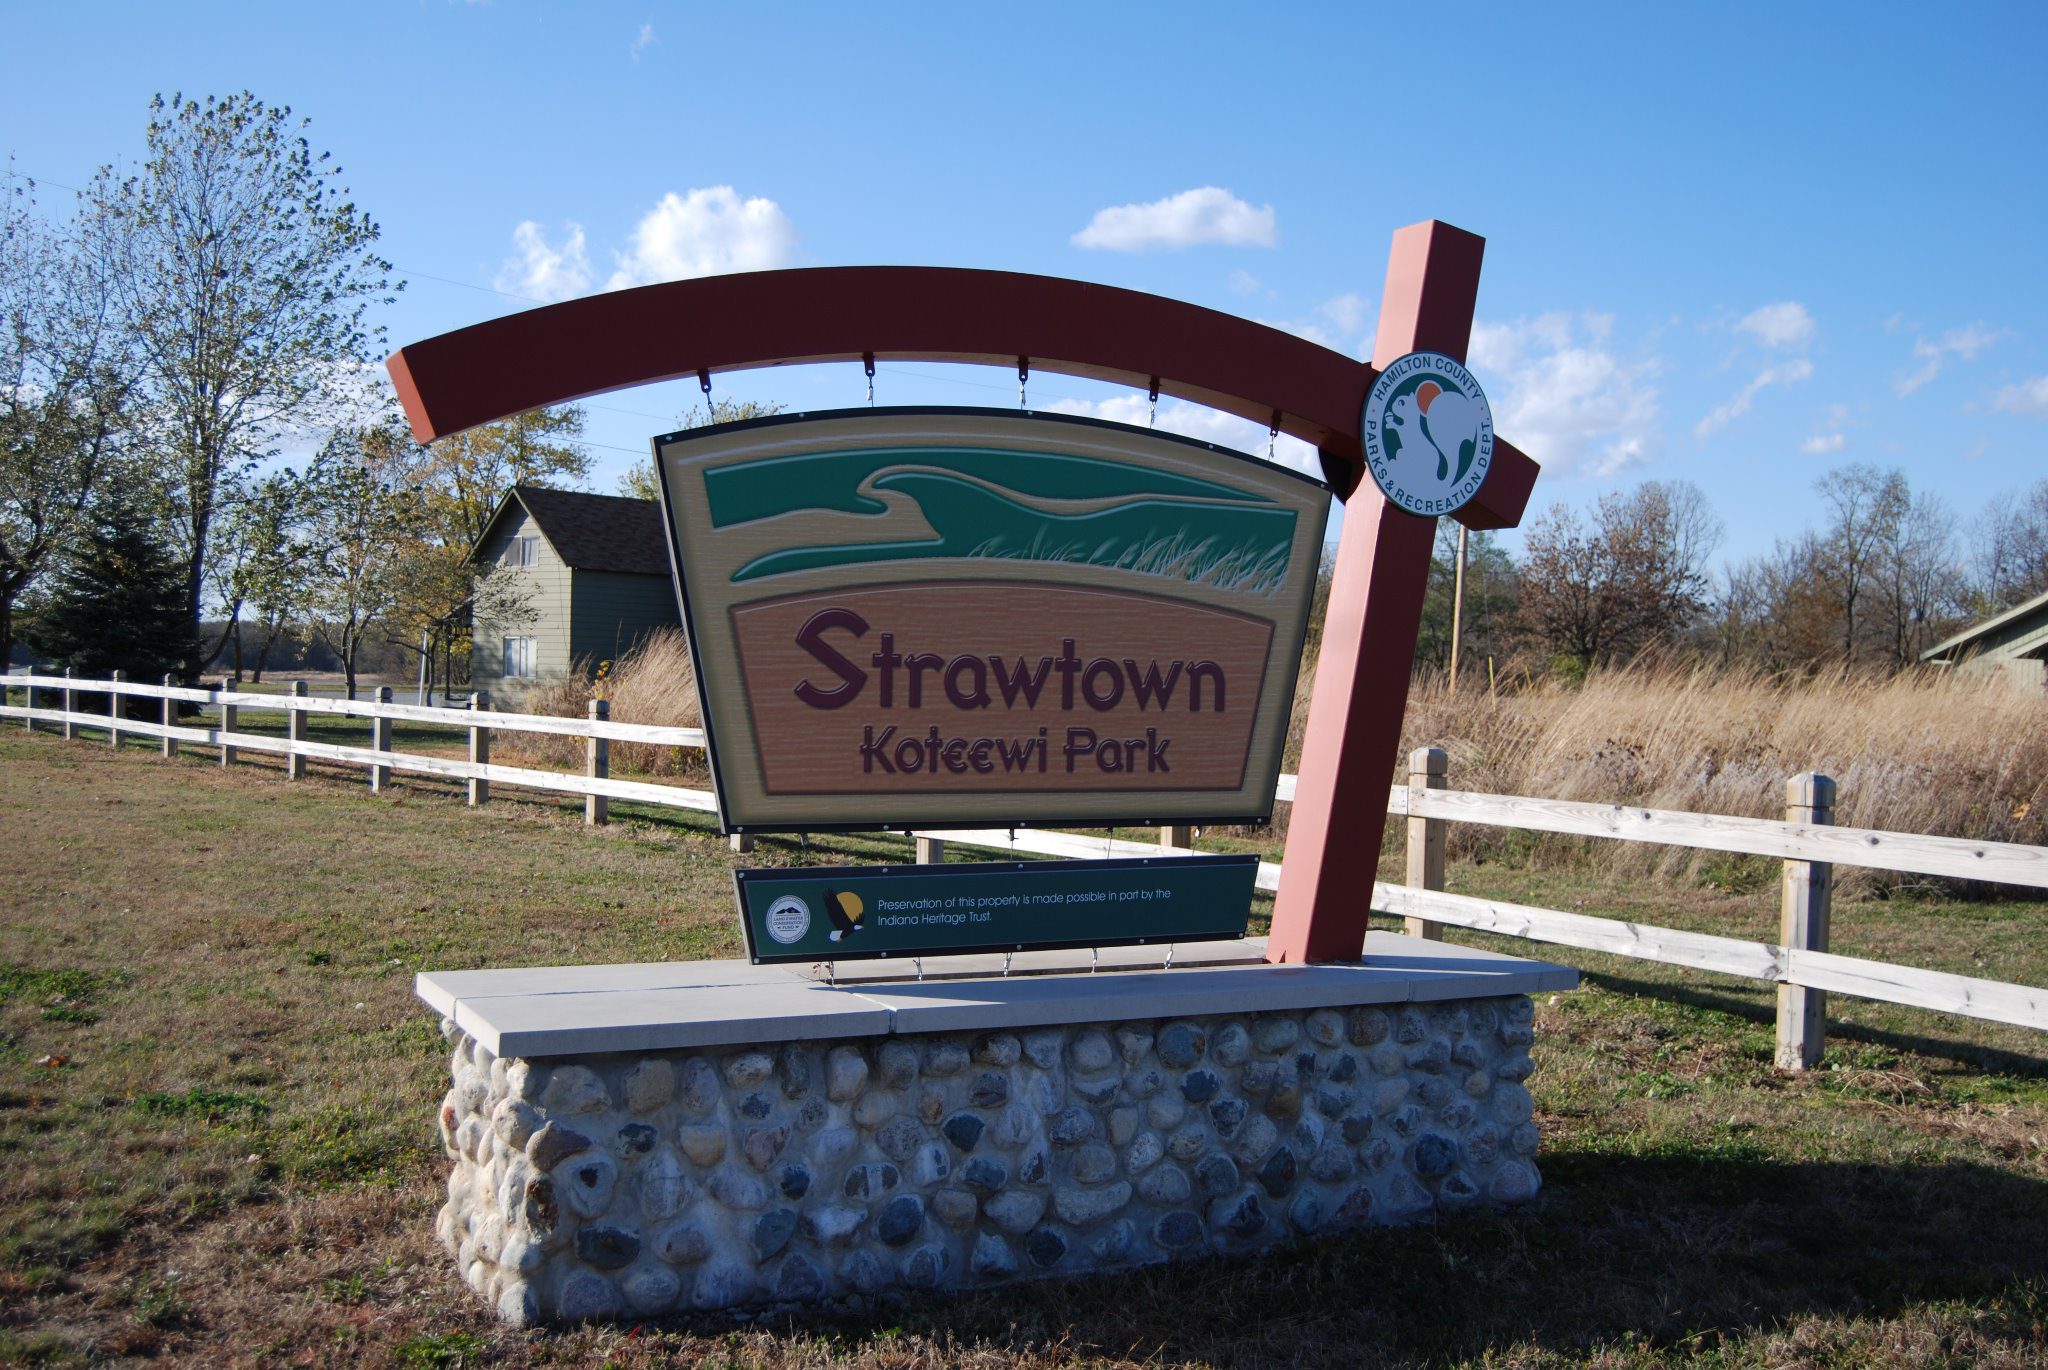 Strawtown Koteewi Park and The Taylor Center of Natural History